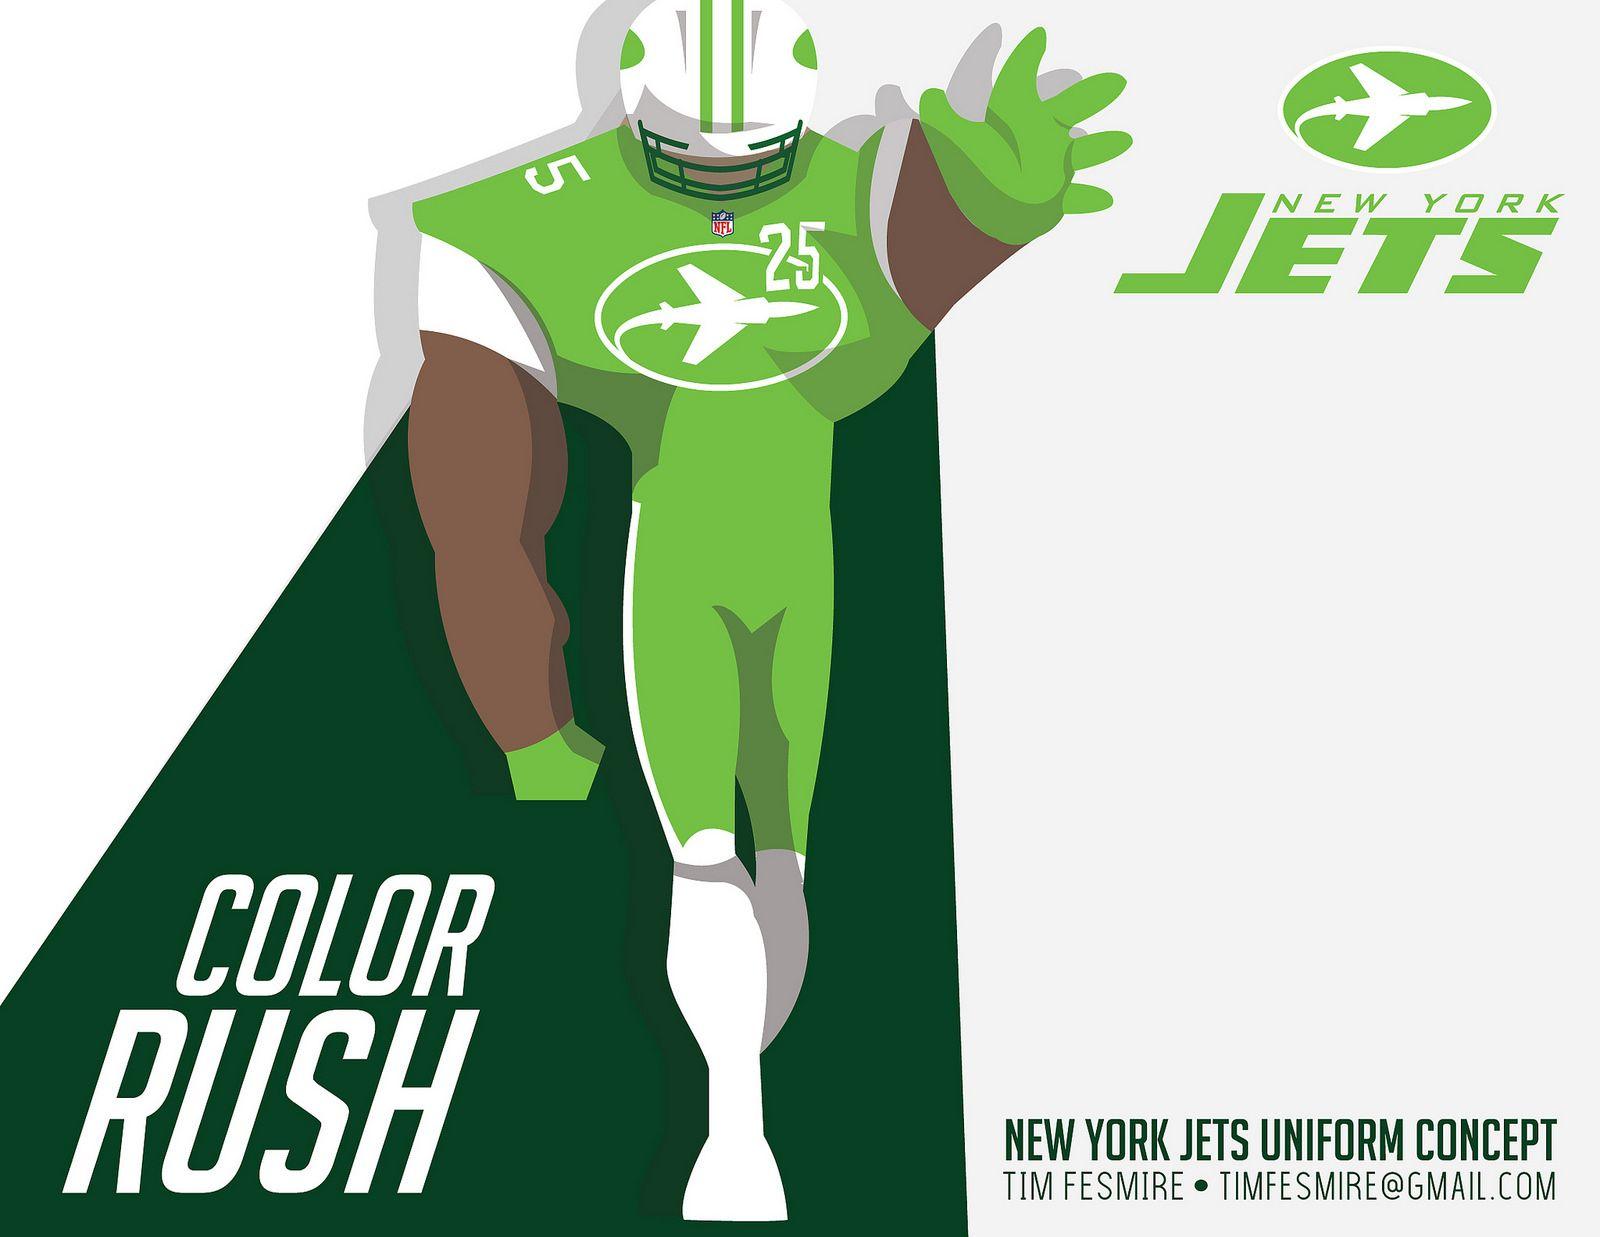 New York Jets New Logo - Uni Watch delivers the winning entries for the New York Jets